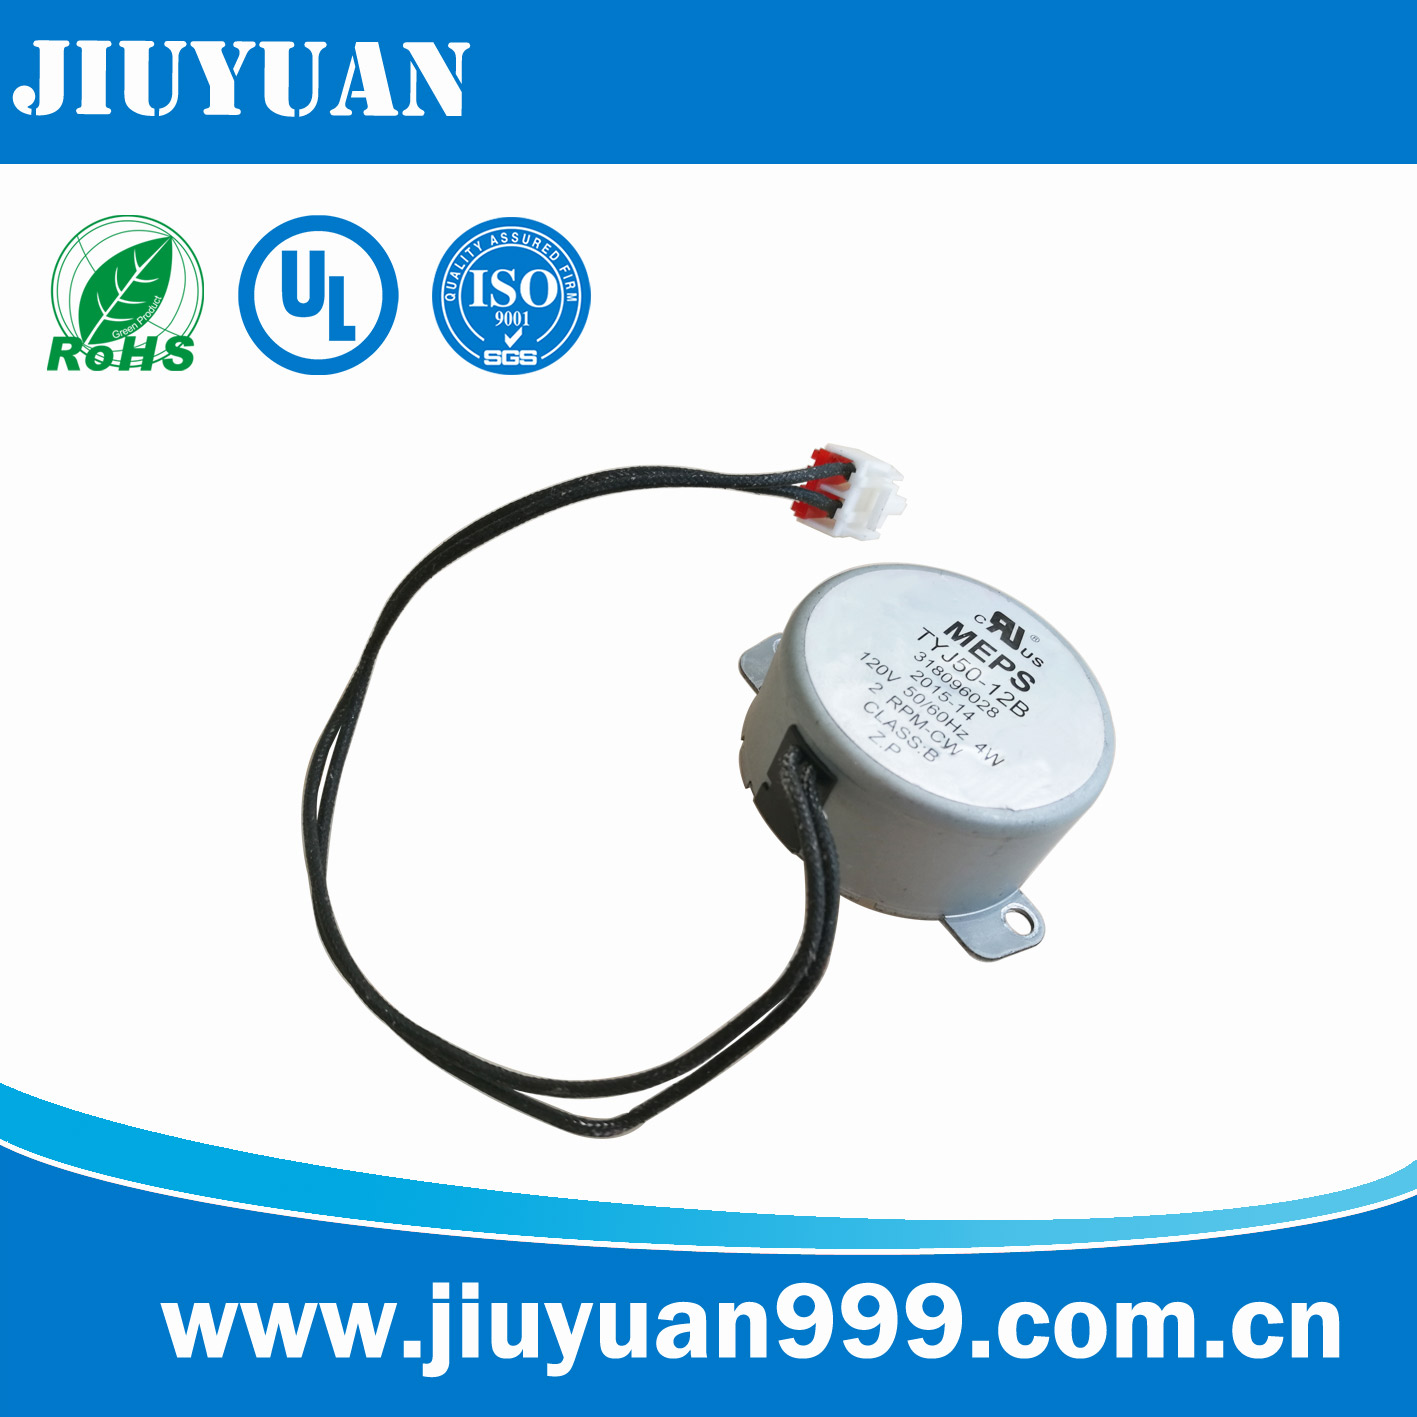 AC micro permanent magnet synchronous motor for Toaster / microwave oven / bread machine